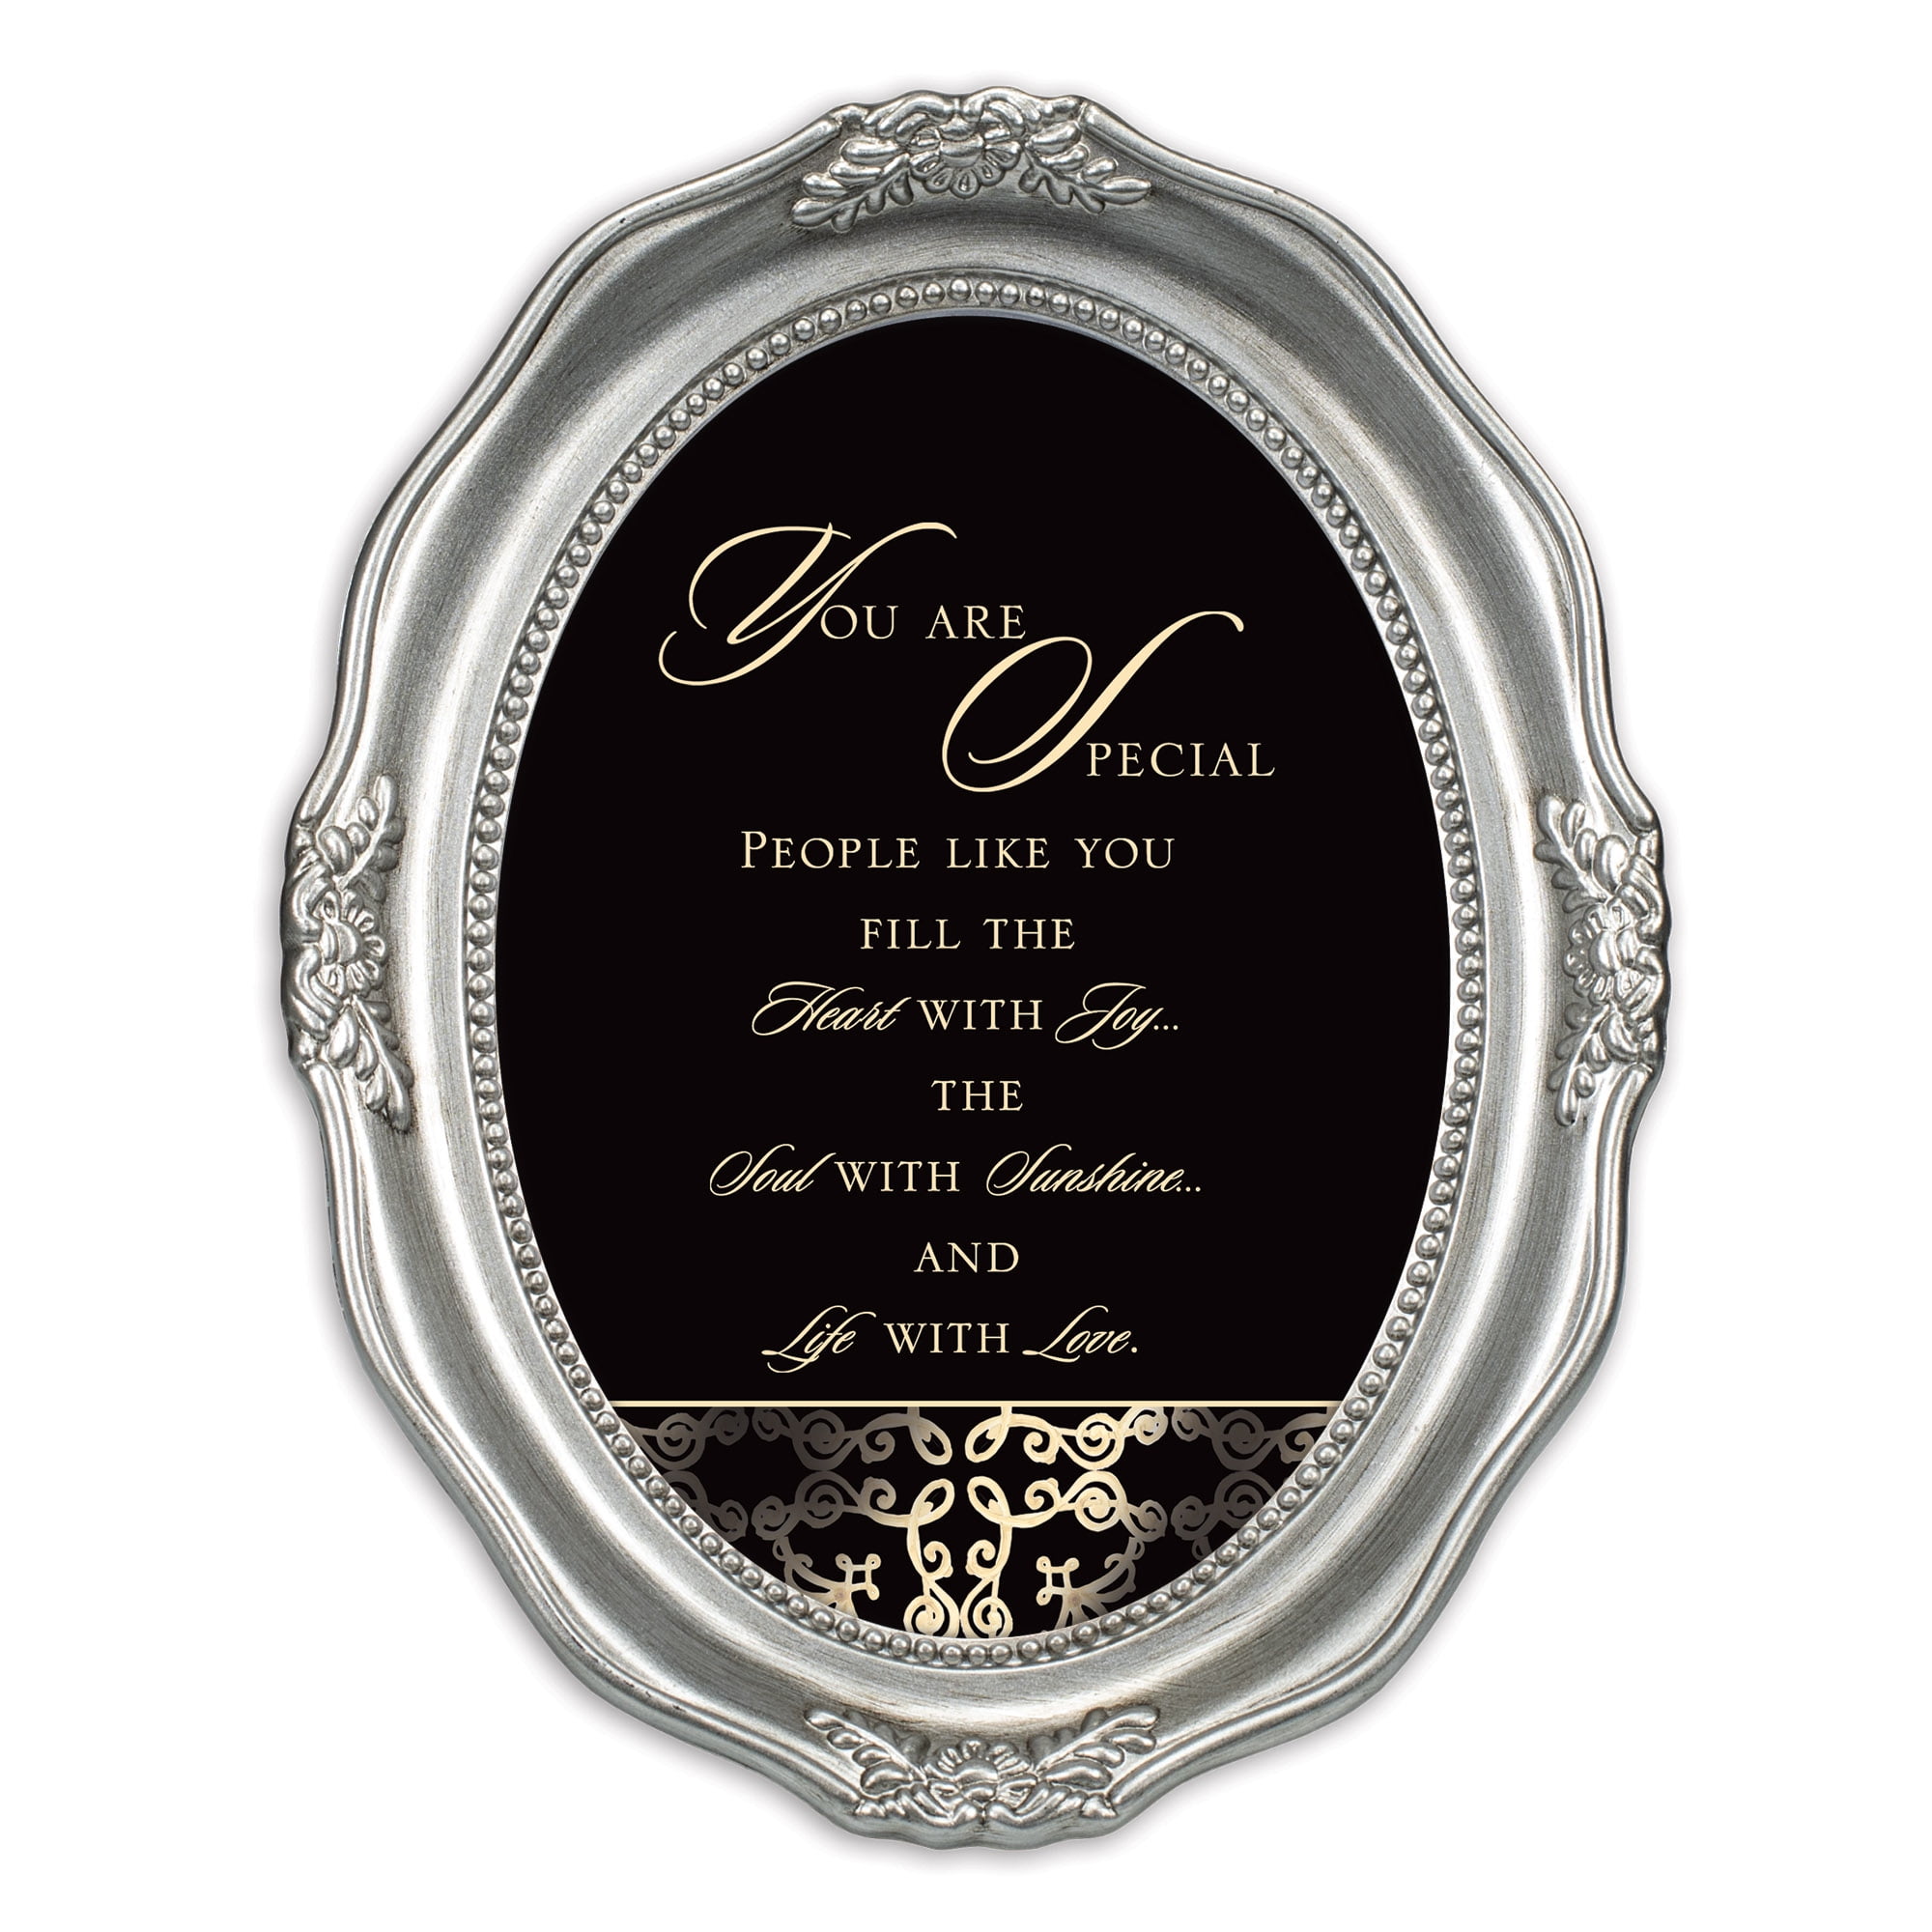 Details about   You Are Special Heart With Joy 5x7 Oval Table Top and Wall Photo Frame 